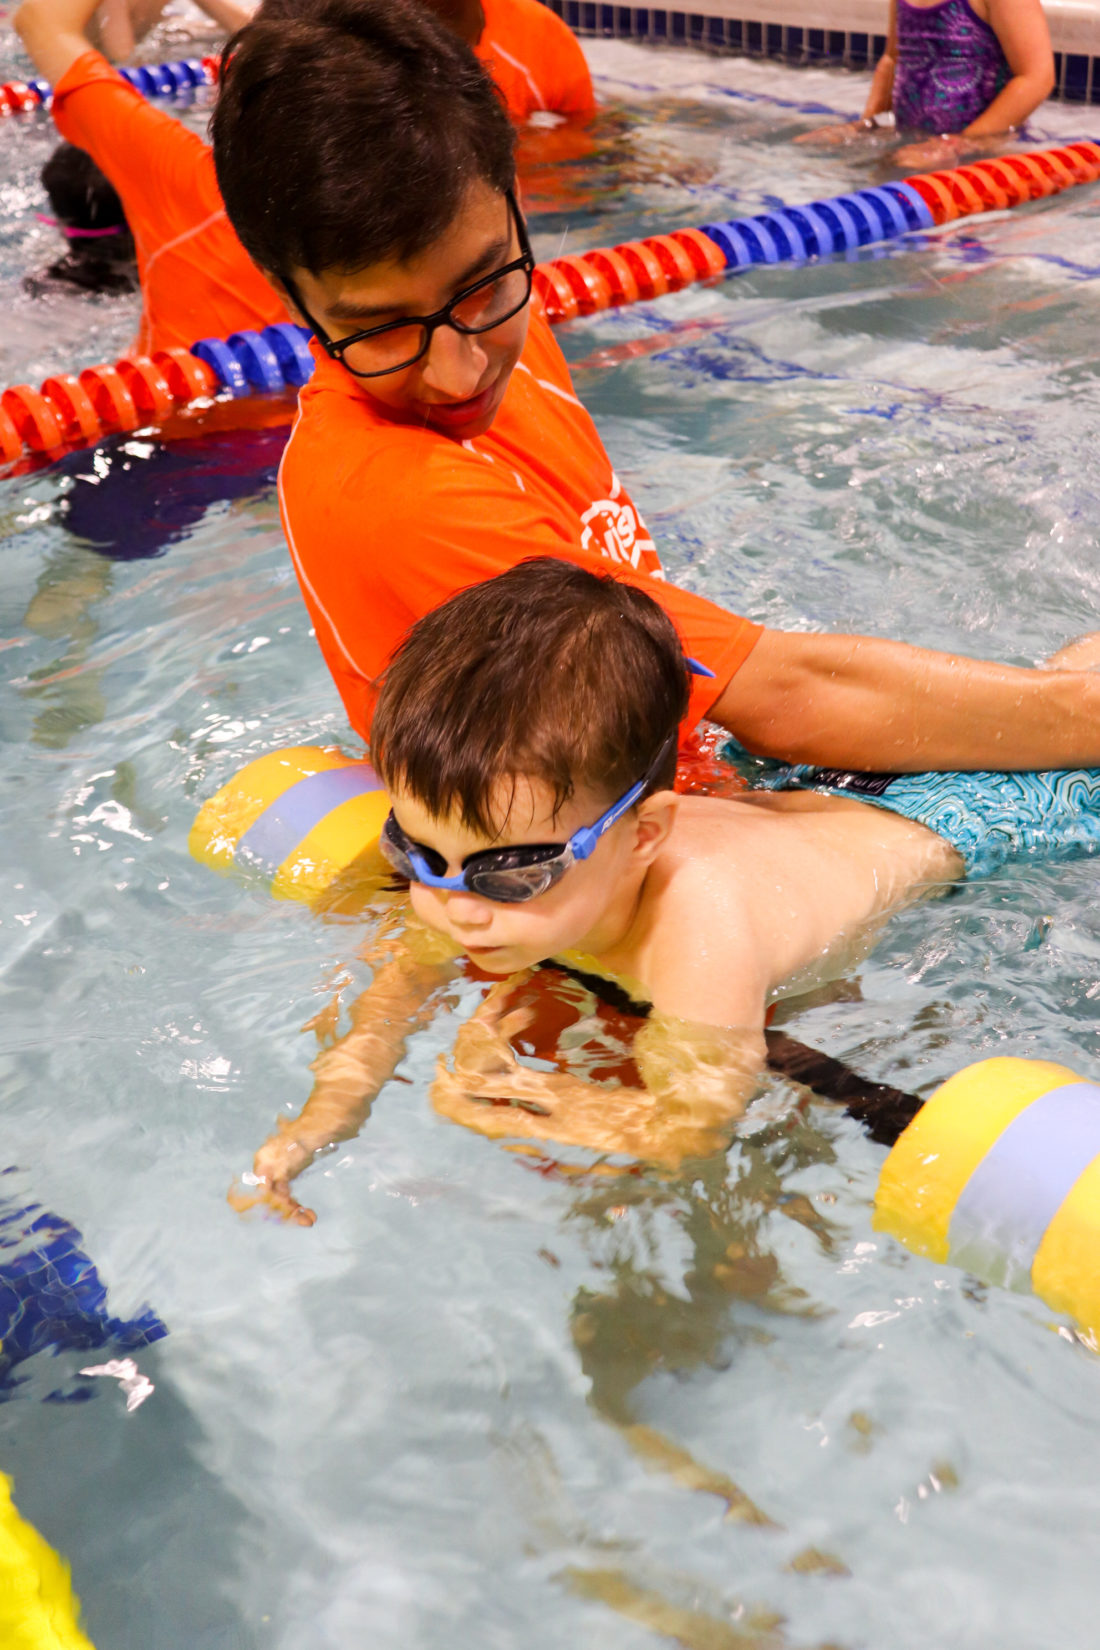 Kids water safety is a priority for the Martino family which is why they enrolled their kids in swim lessons